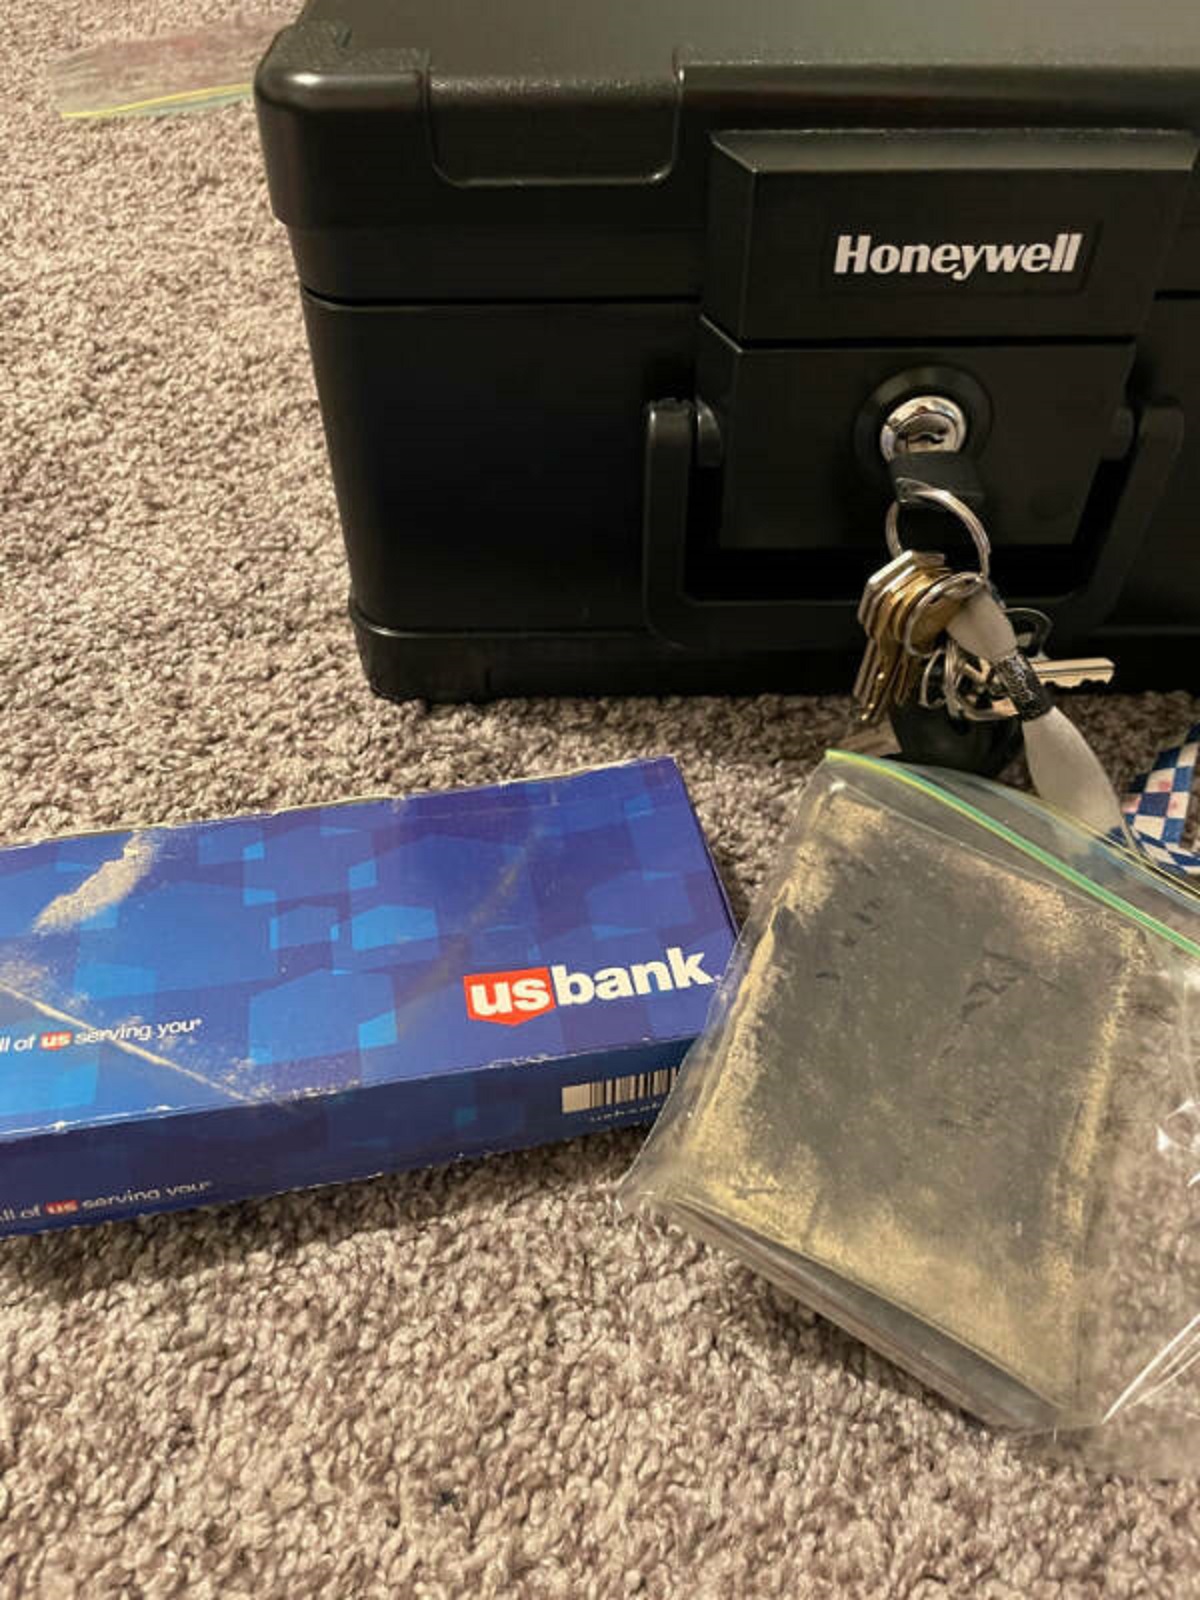 “Opened up my fireproof safe to find my passport growing mold on top of all of my important documents”